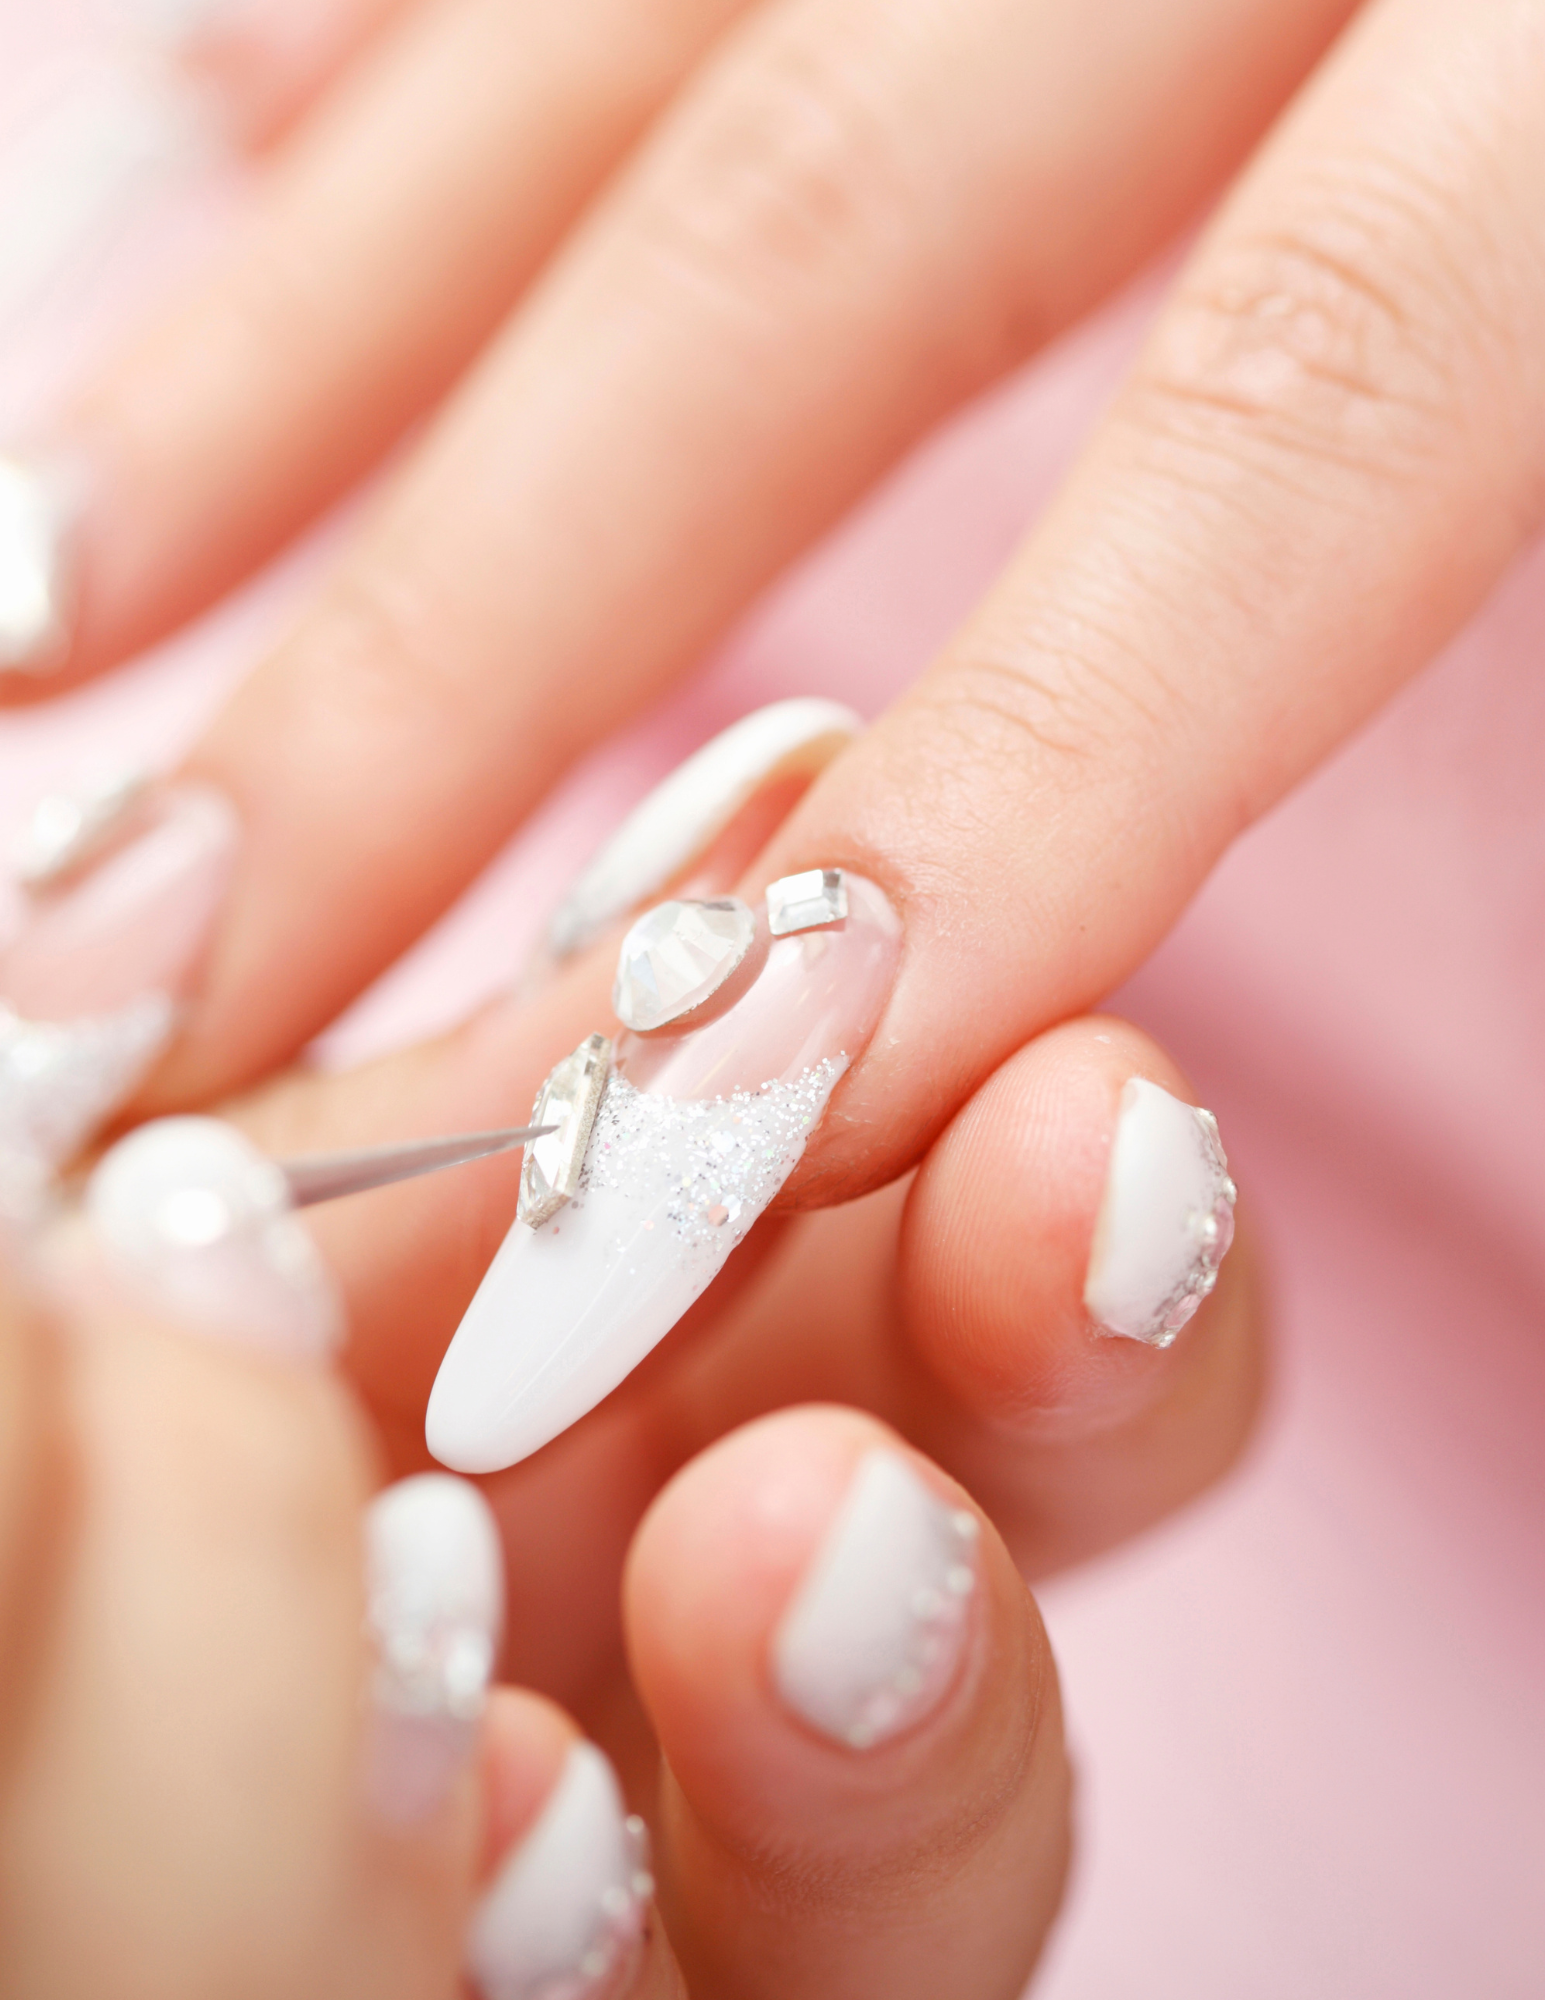 22 Winter Wedding Nail Art Designs for Your Special Day ...